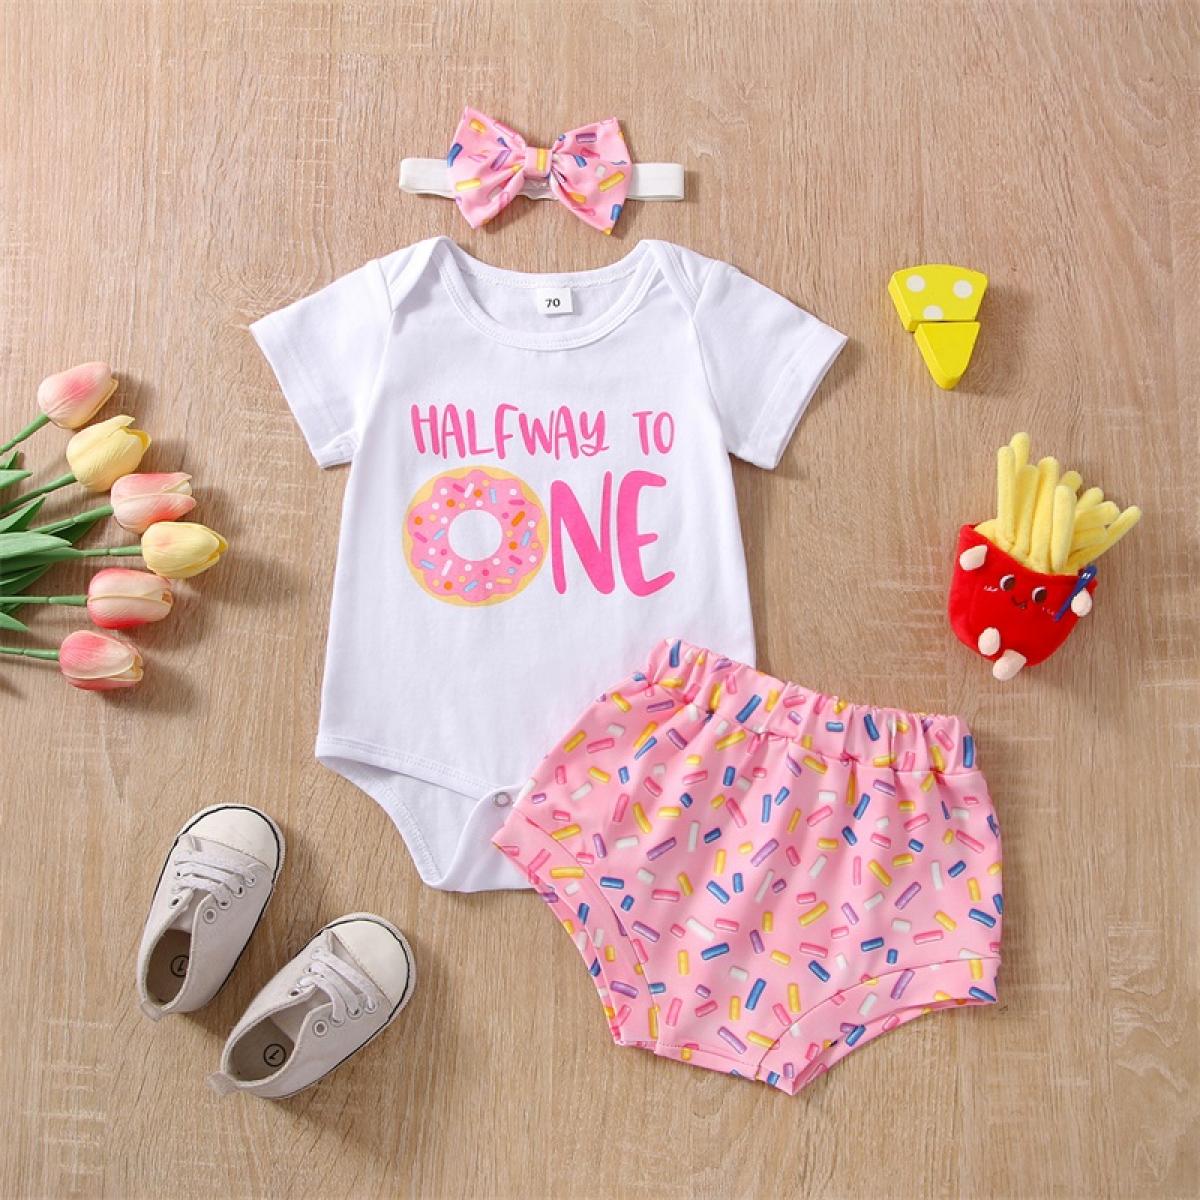 https://d3thqe68ymbqps.cloudfront.net/3496464-large_default/sunsiom-baby-girls-birthday-outfit-summer-clothes-short-sleeve-doughnu.jpg